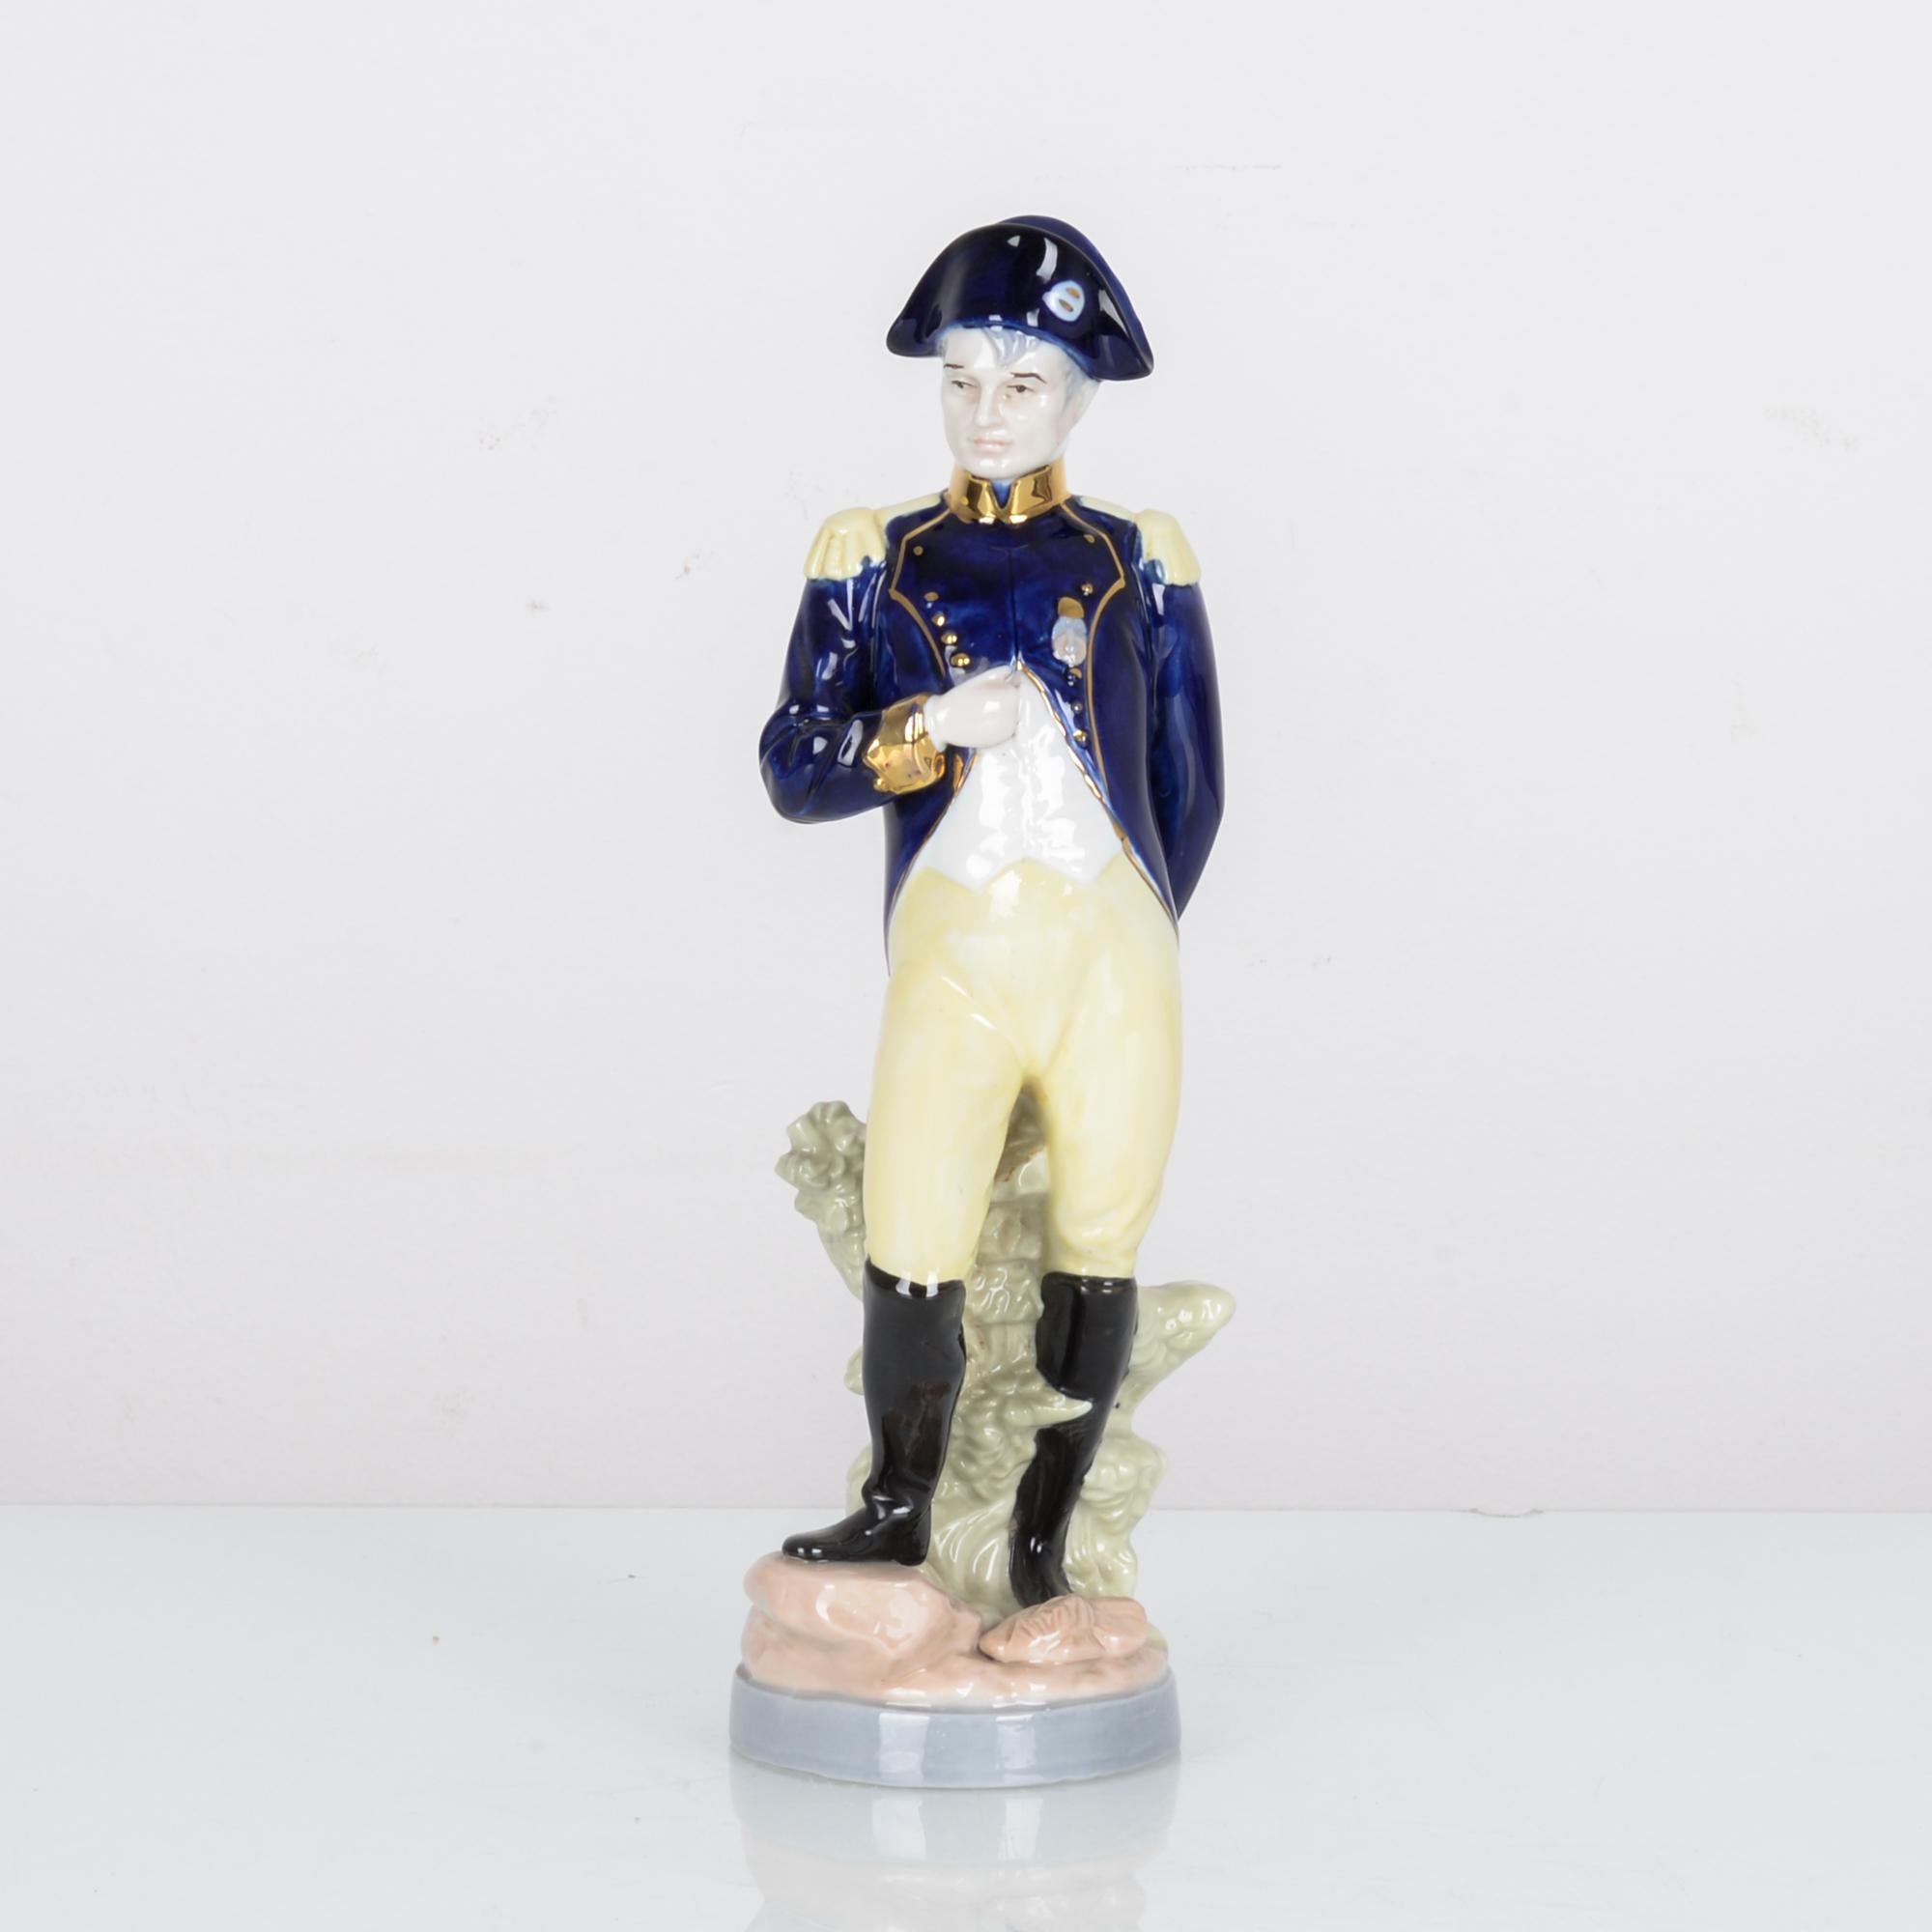 This hand painted ceramic figurine was made in France, circa 1920. The figure of Napoleon stands with one hand in his waistcoat, a gesture associated with assurance and nobility. The deep cobalt blue of his hat and jacket stands out against the